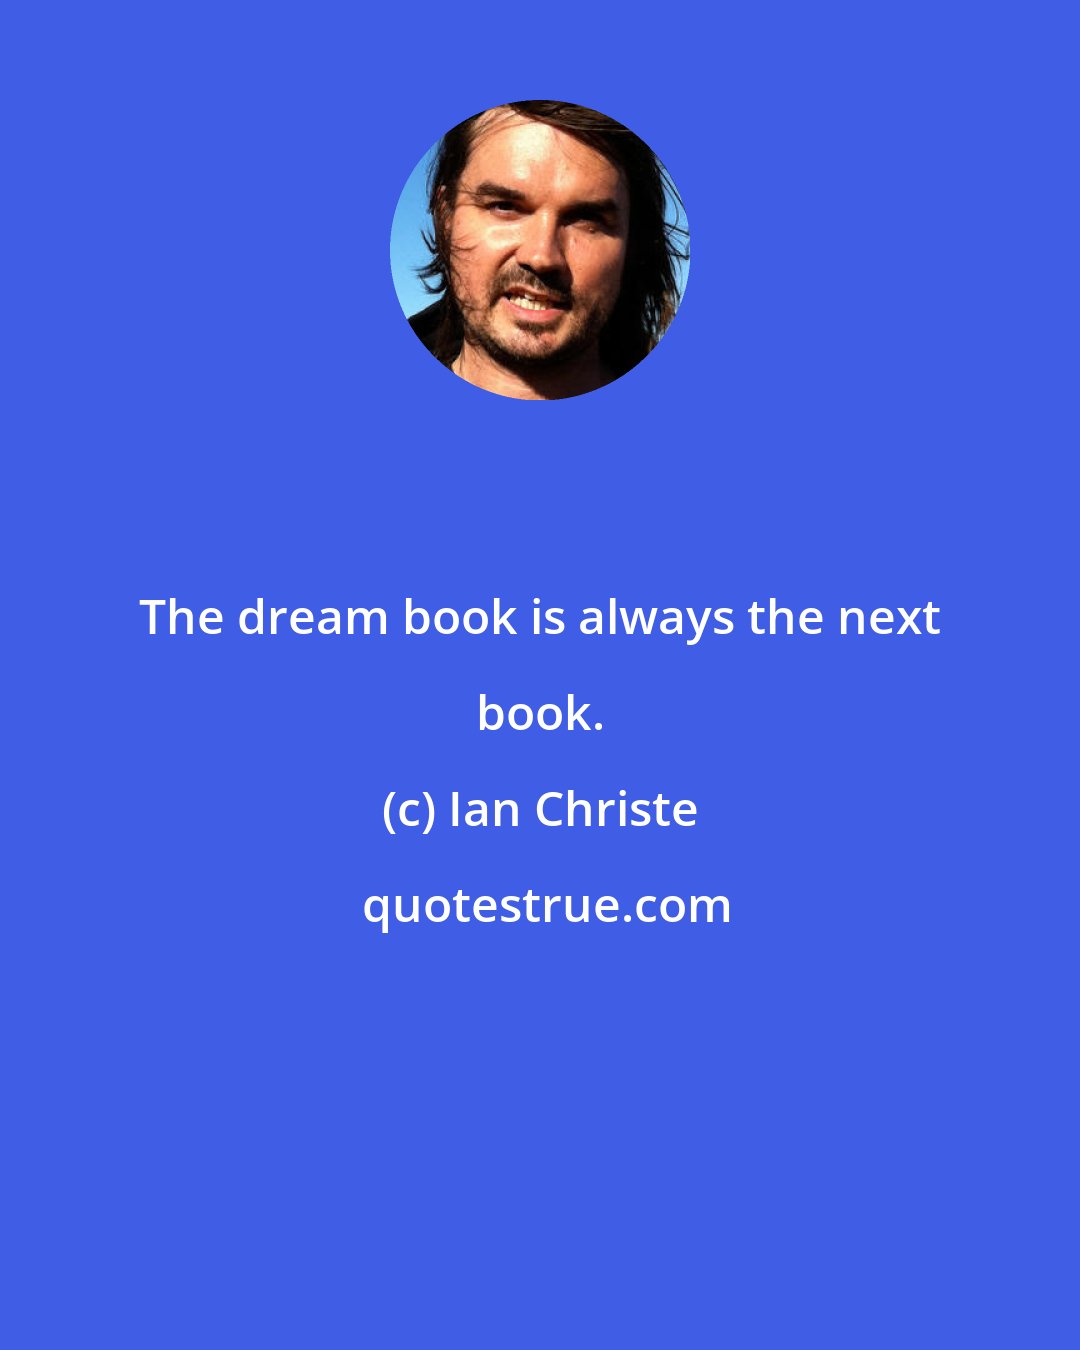 Ian Christe: The dream book is always the next book.